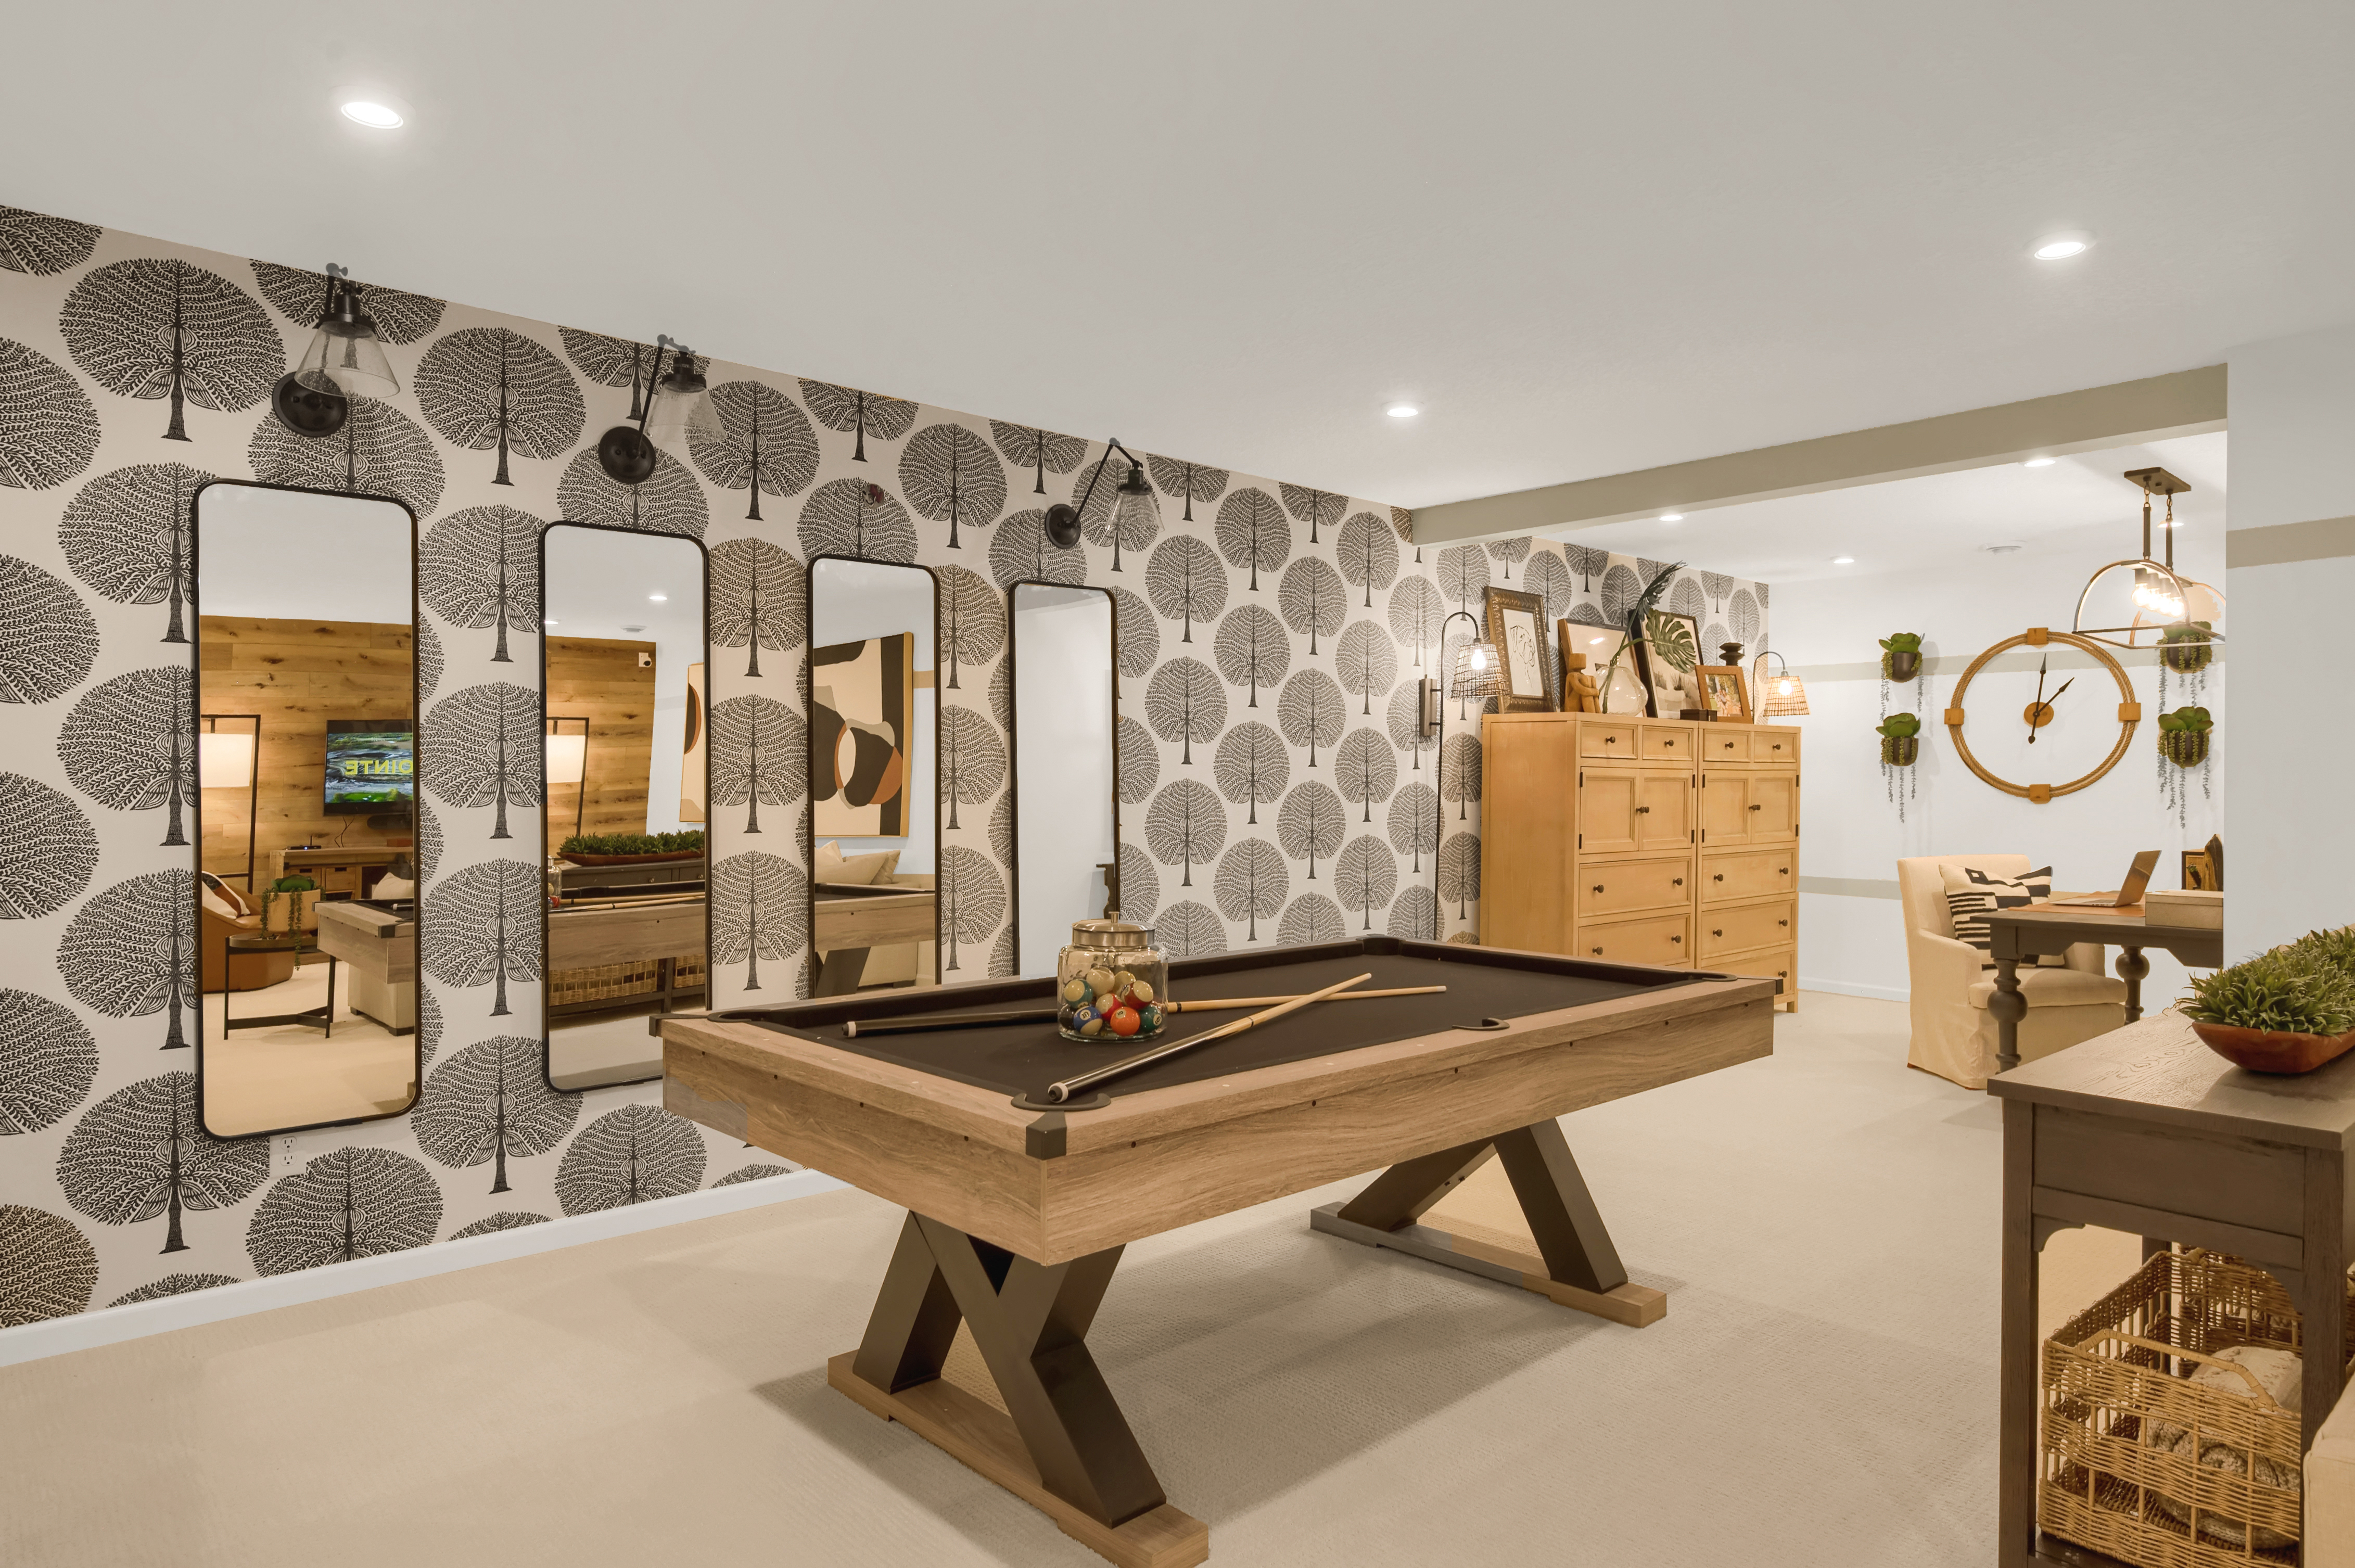 Basement With a Pool Table and Fun Wallpaper and Mirrors on Wall